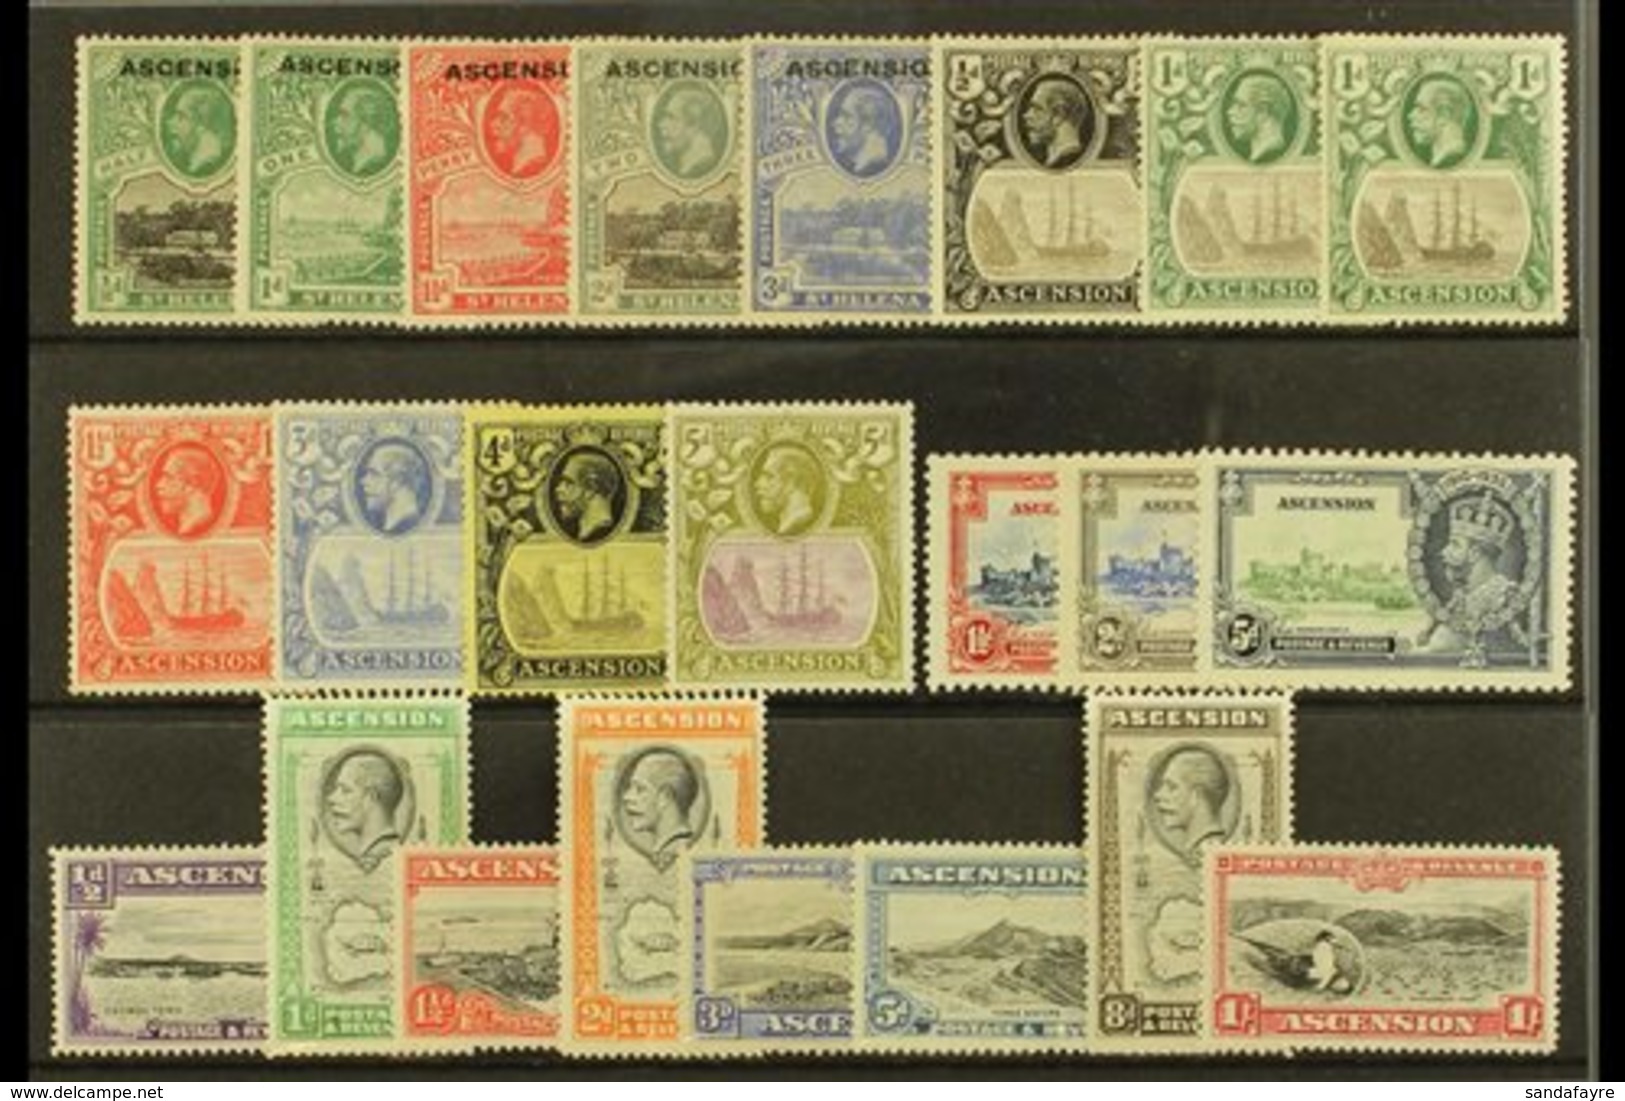 1922-1935 FINE MINT KGV SELECTION  Presented On A Stock Card. Includes 1922 Set To 3d, 1924-33 "Badge" To 5d, 1934 Set T - Ascension